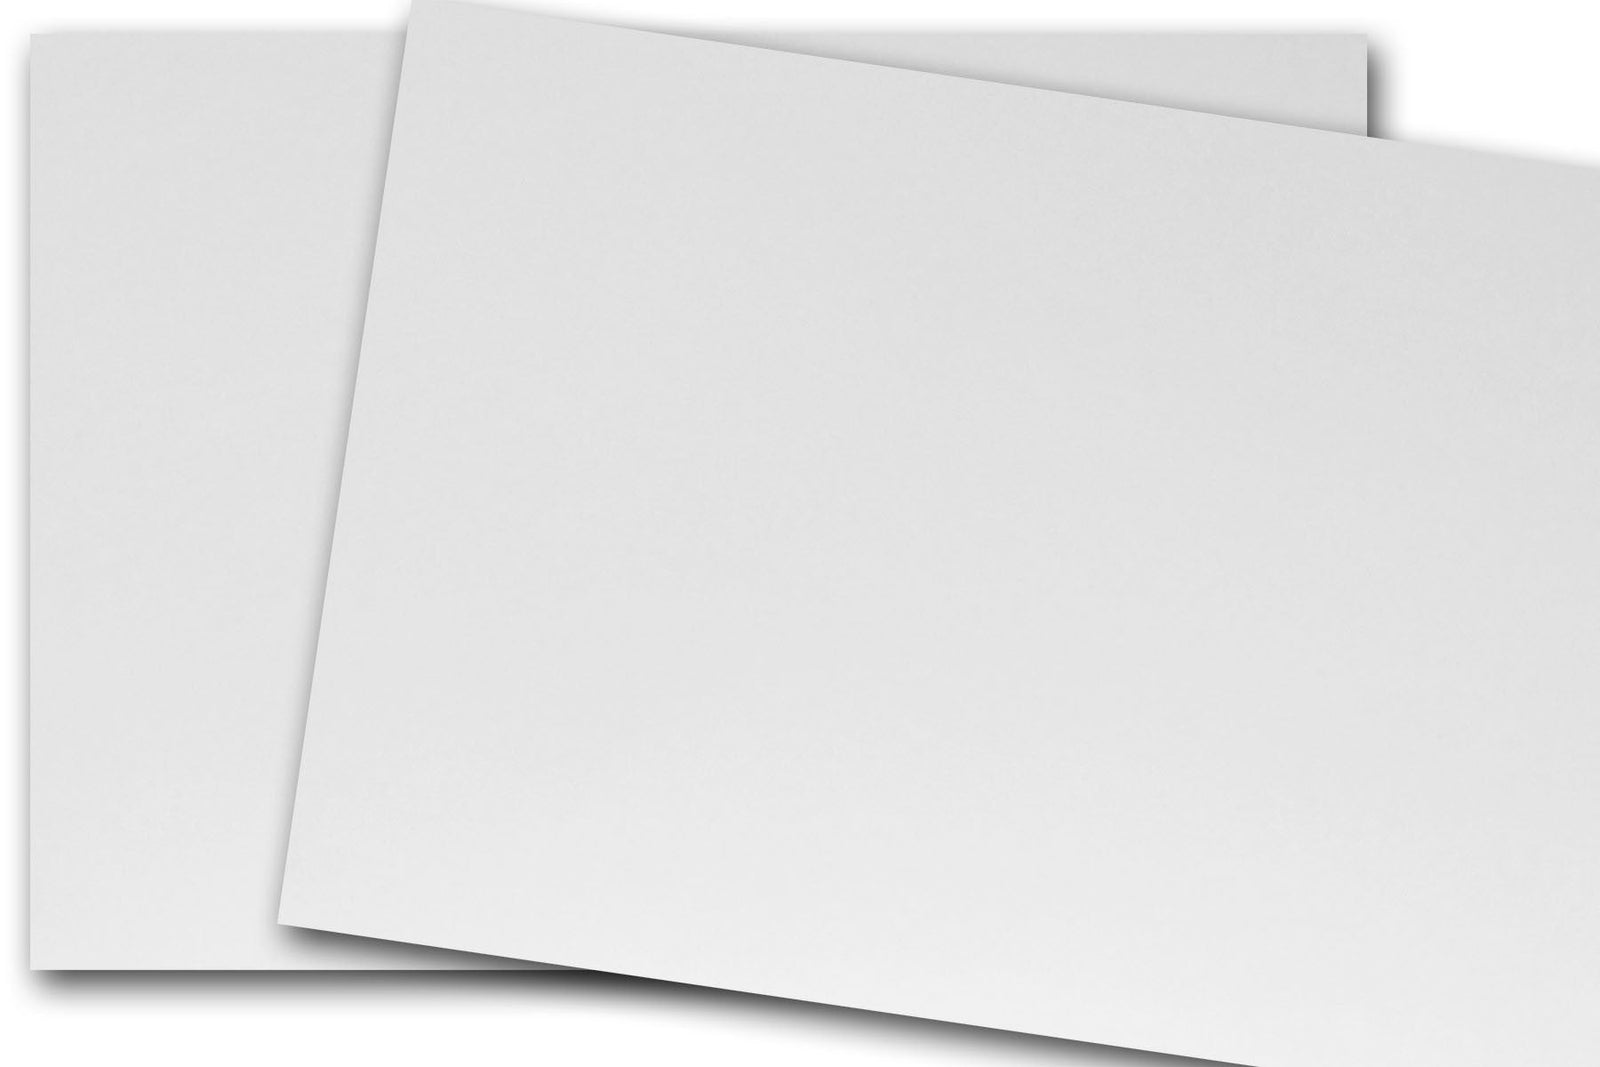  12 x 12 Fine Square Cardstock - Cover Bright White Thick Paper  Card Stock Smooth Finish, 80lb (216gsm)